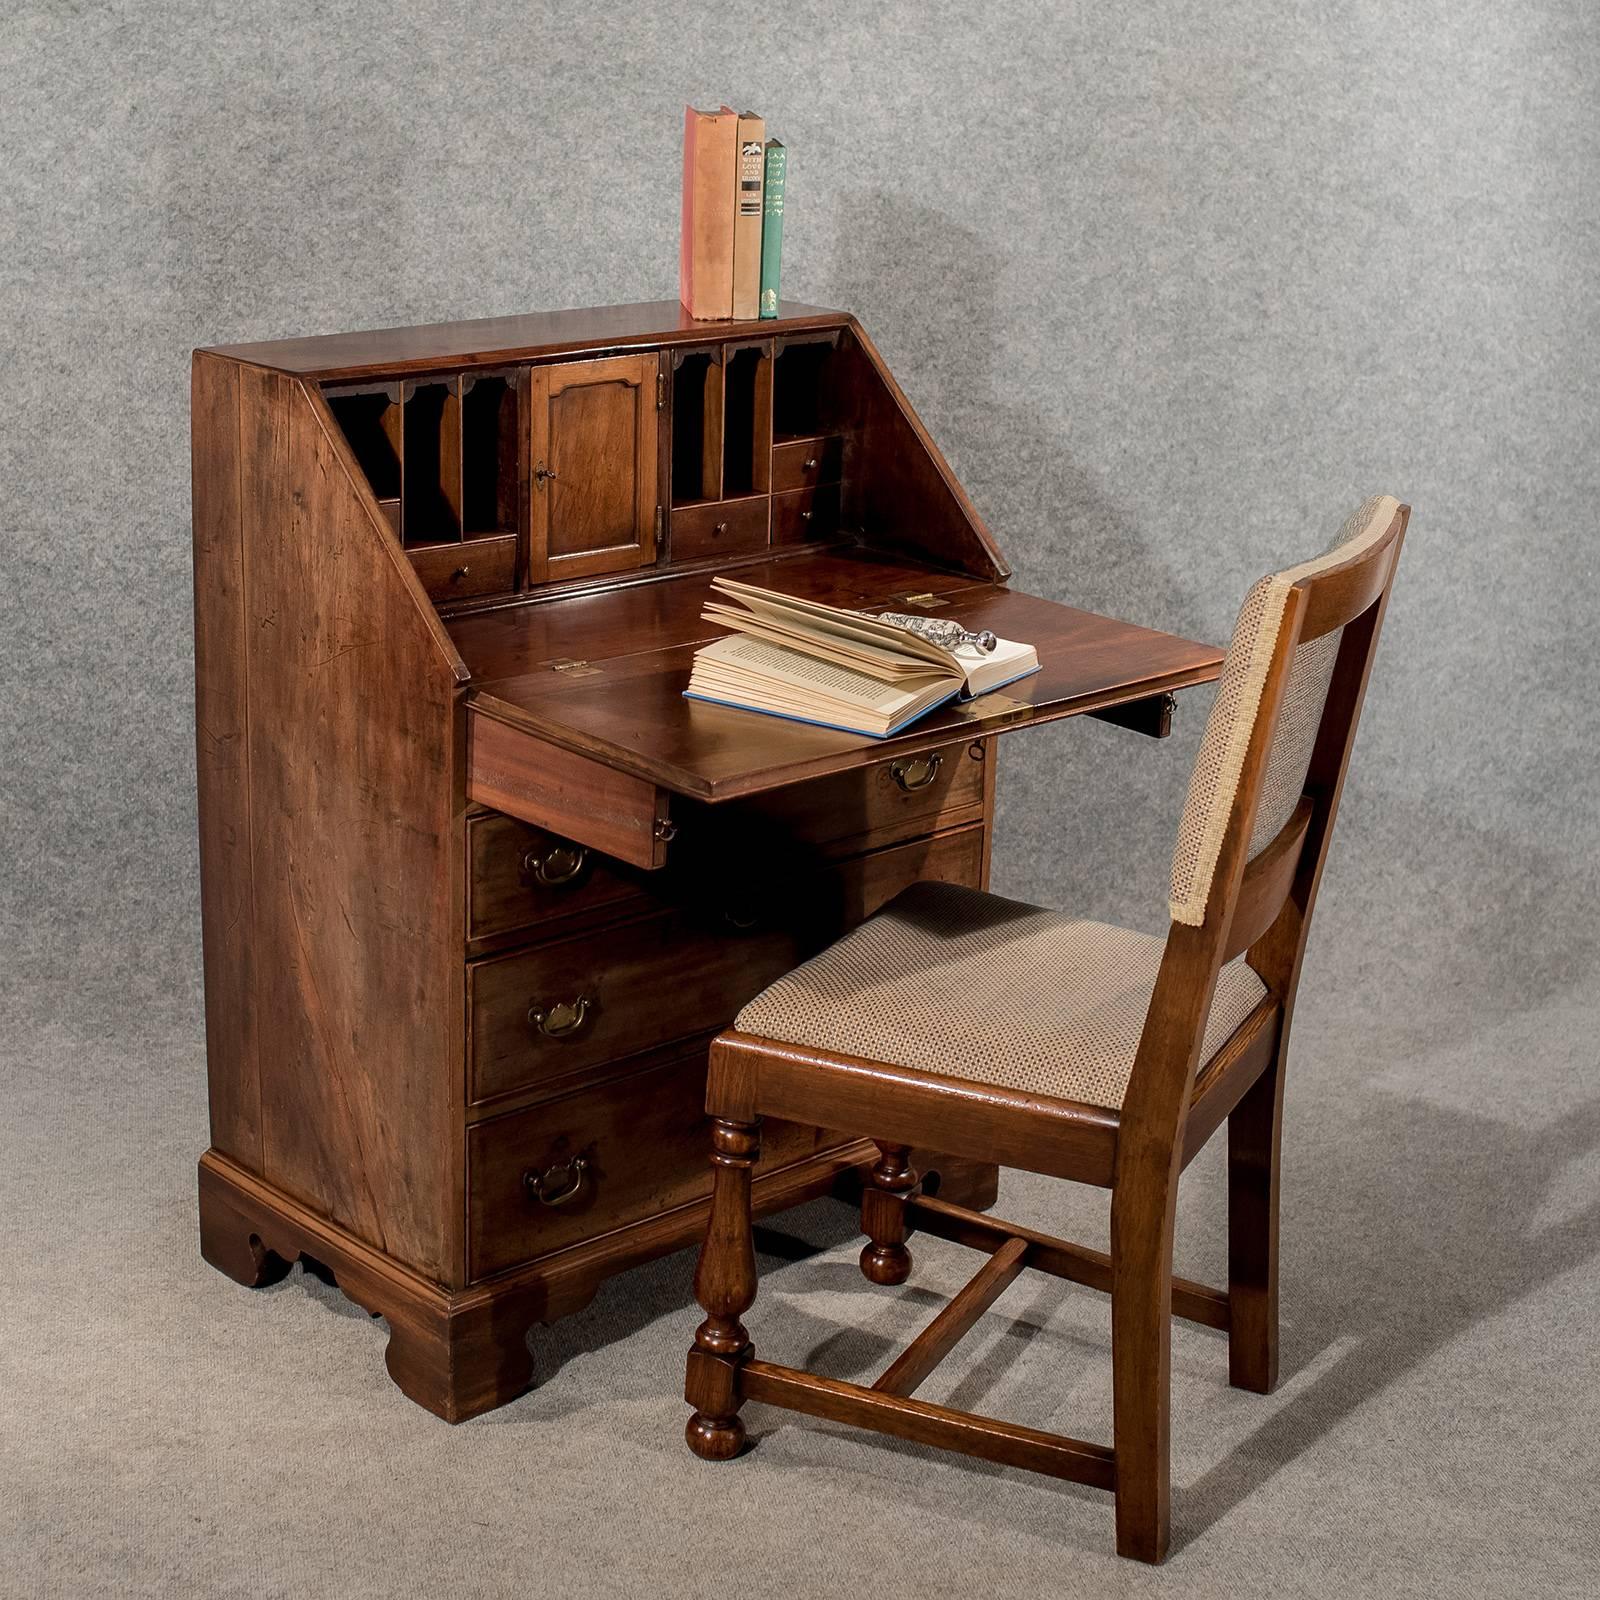 A very pleasing original Georgian writing bureau desk presented in good antique condition
Mid-size and offering a well fitted interior layout
Of interest displaying classic English Georgian styling throughout
In attractive mahogany with a